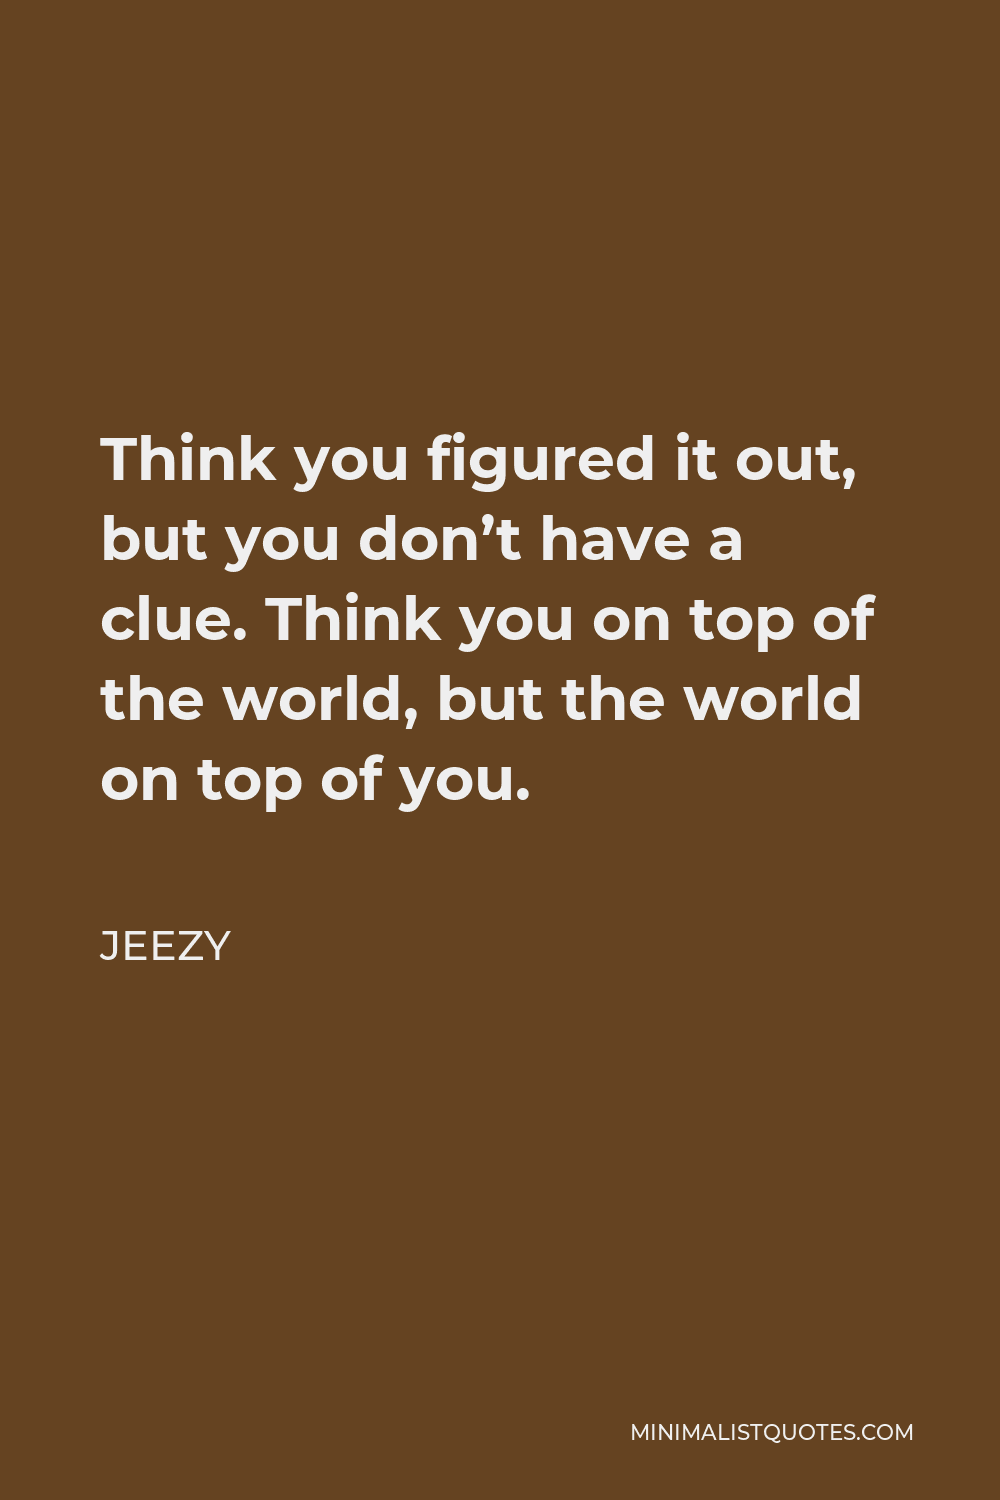 Jeezy Quote - Think you figured it out, but you don’t have a clue. Think you on top of the world, but the world on top of you.